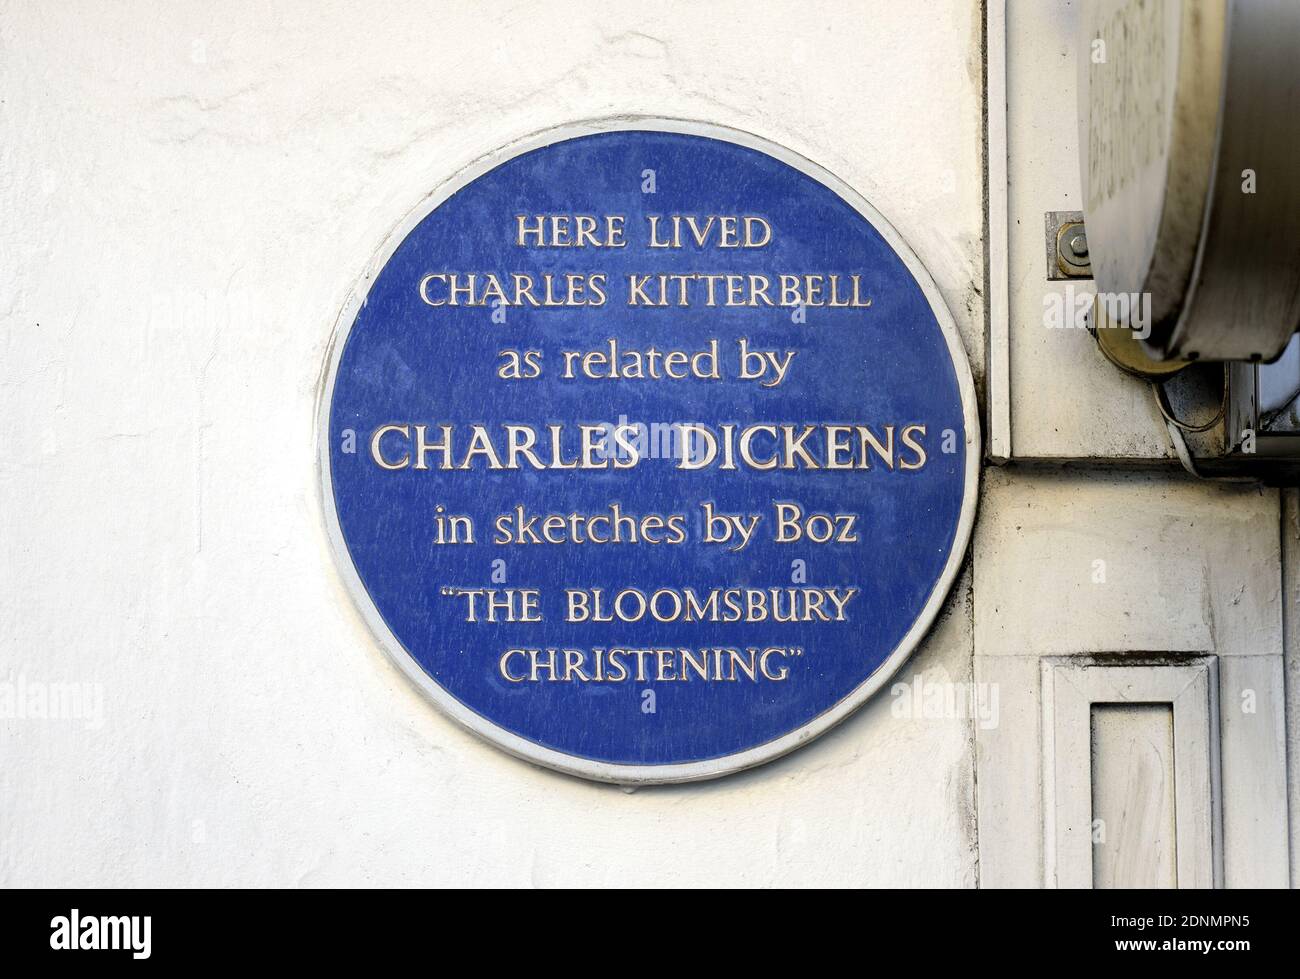 London, UK. Commemorative plaque at 14 Great Russell Street: 'Here lived Charles Kitterbell as related by Charles Dickens in Sketches by Boz 'The Bloo Stock Photo